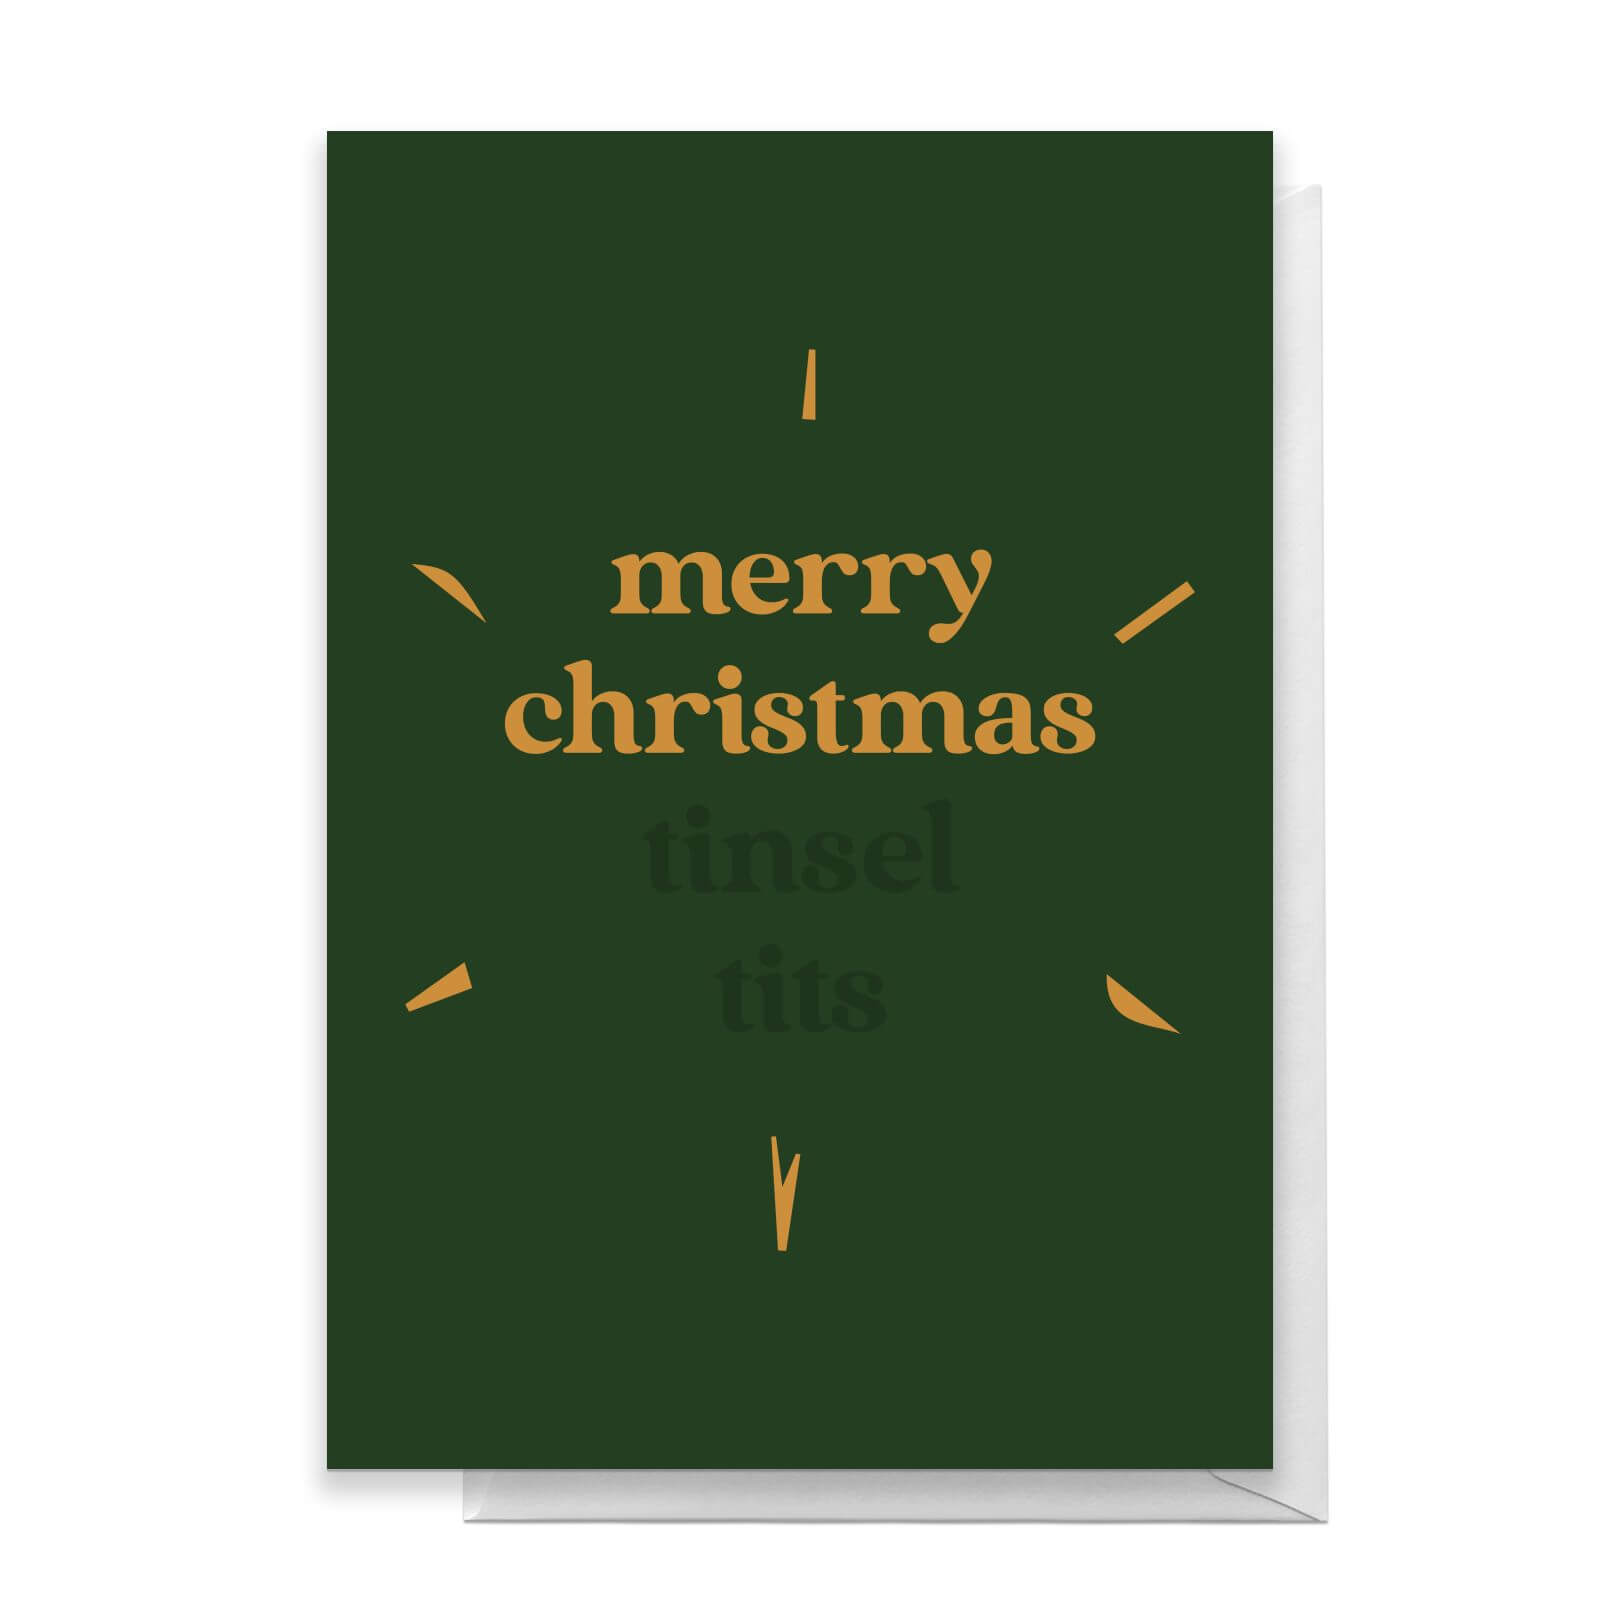 Merry Christmas Tinsel Tits Greetings Card - Giant Card